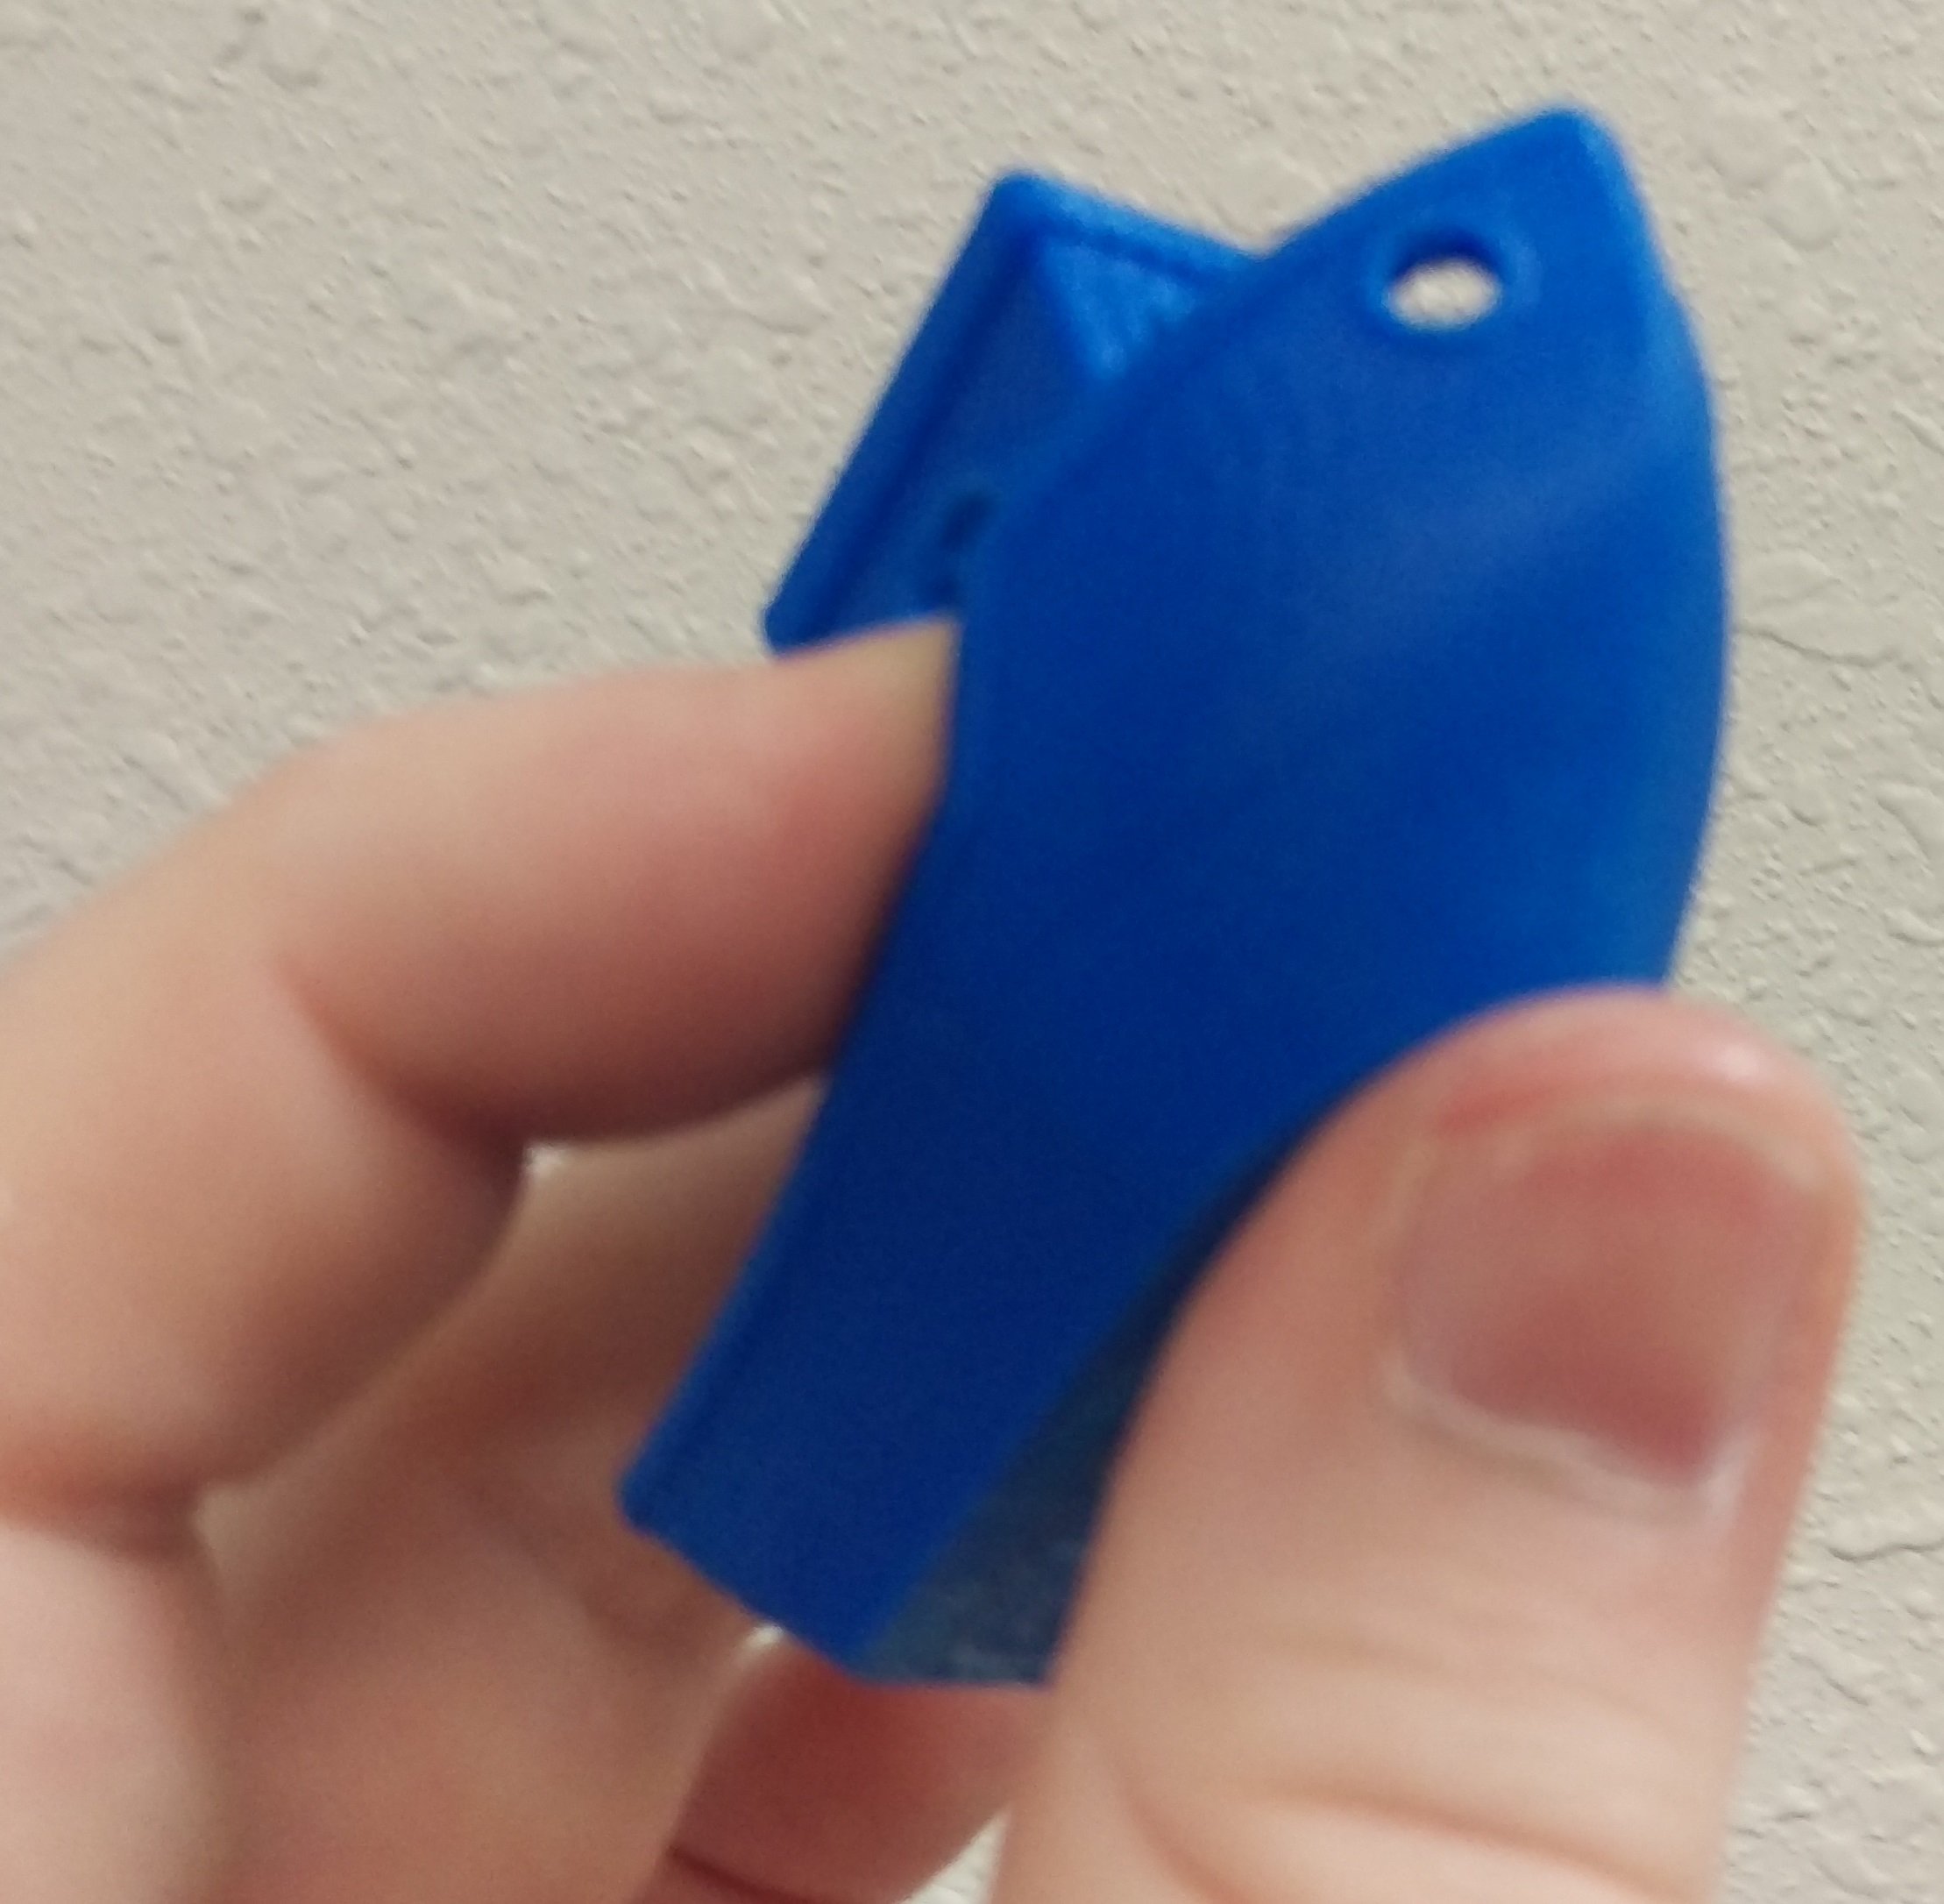 Final blue benchy, with no more visible white marks